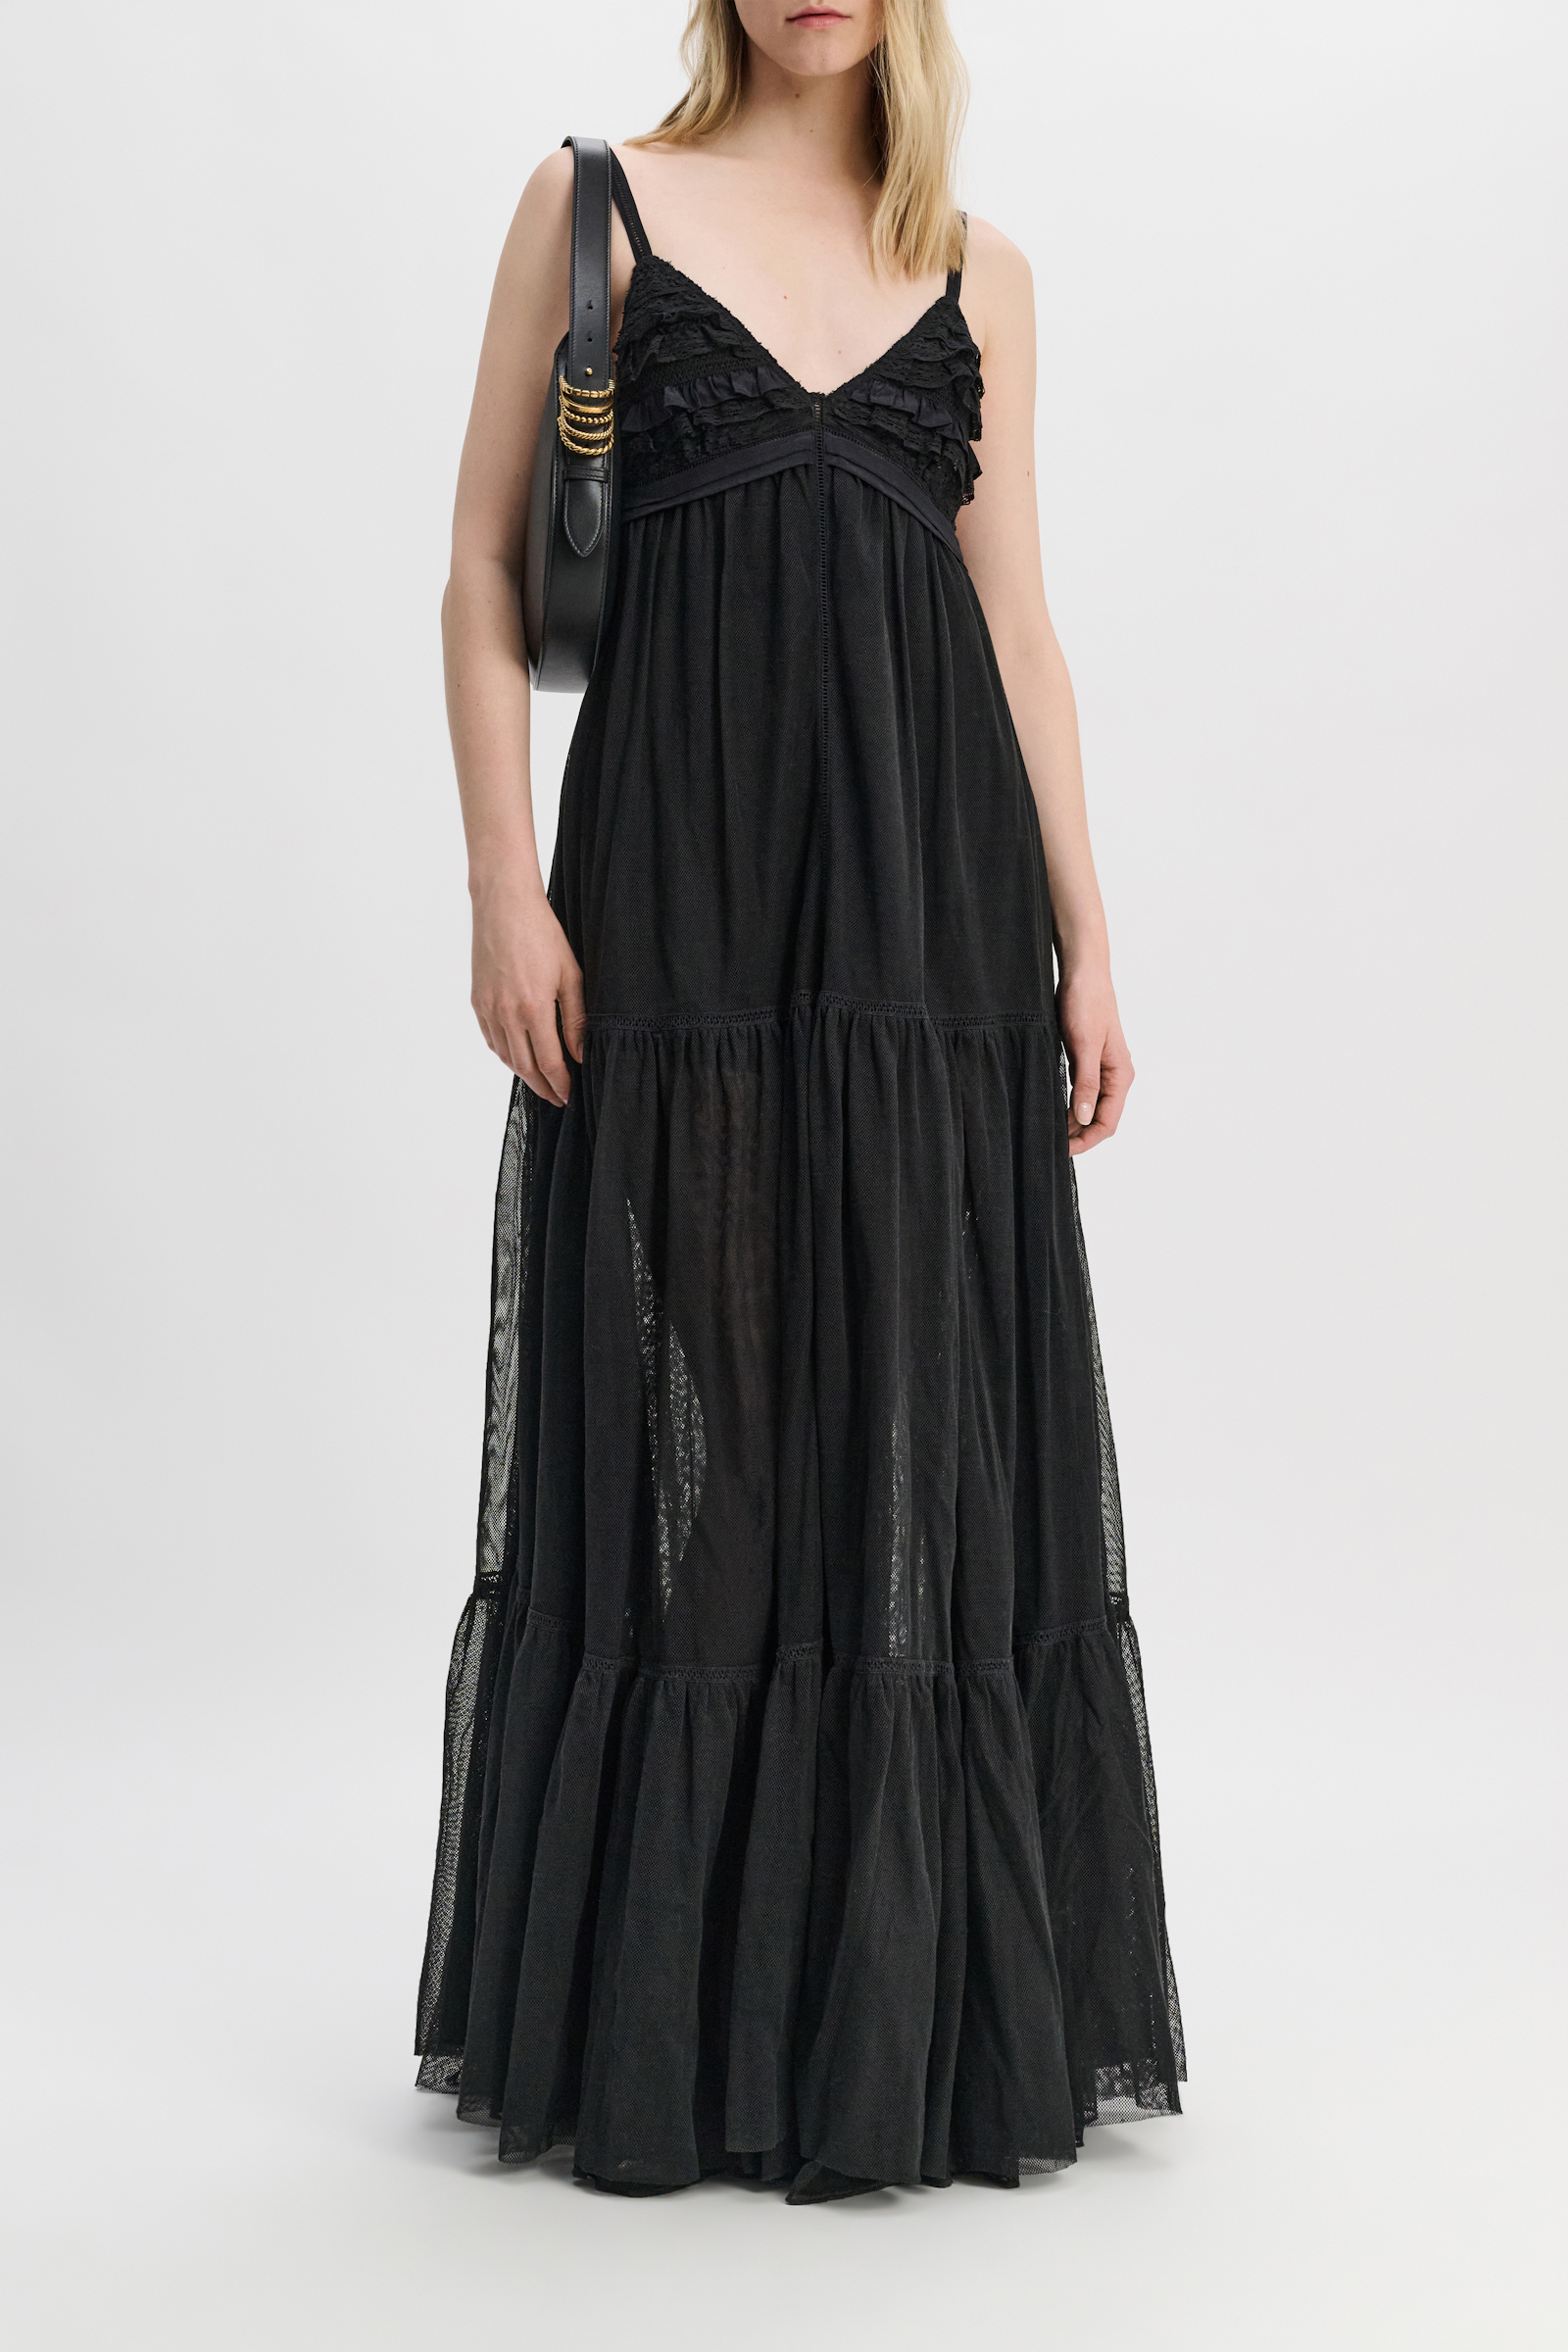 Dorothee Schumacher Low back maxi dress with tulle and ribbon details pure black